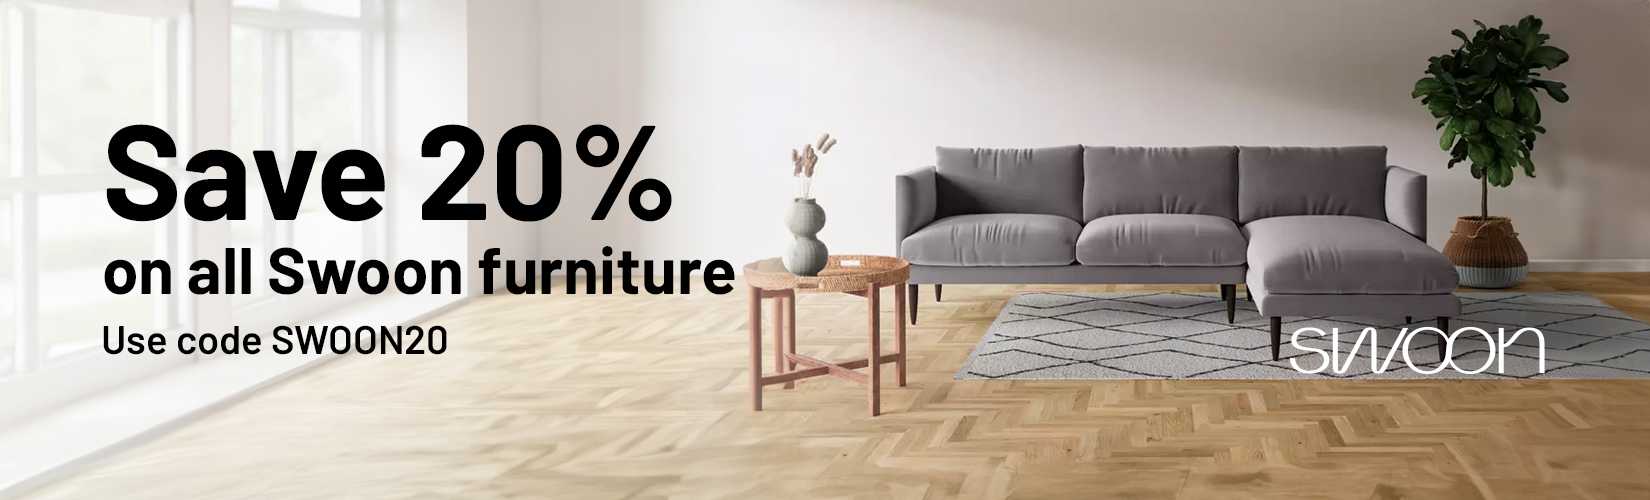 Save 20% on all Swoon furniture. Use code SWOON20.